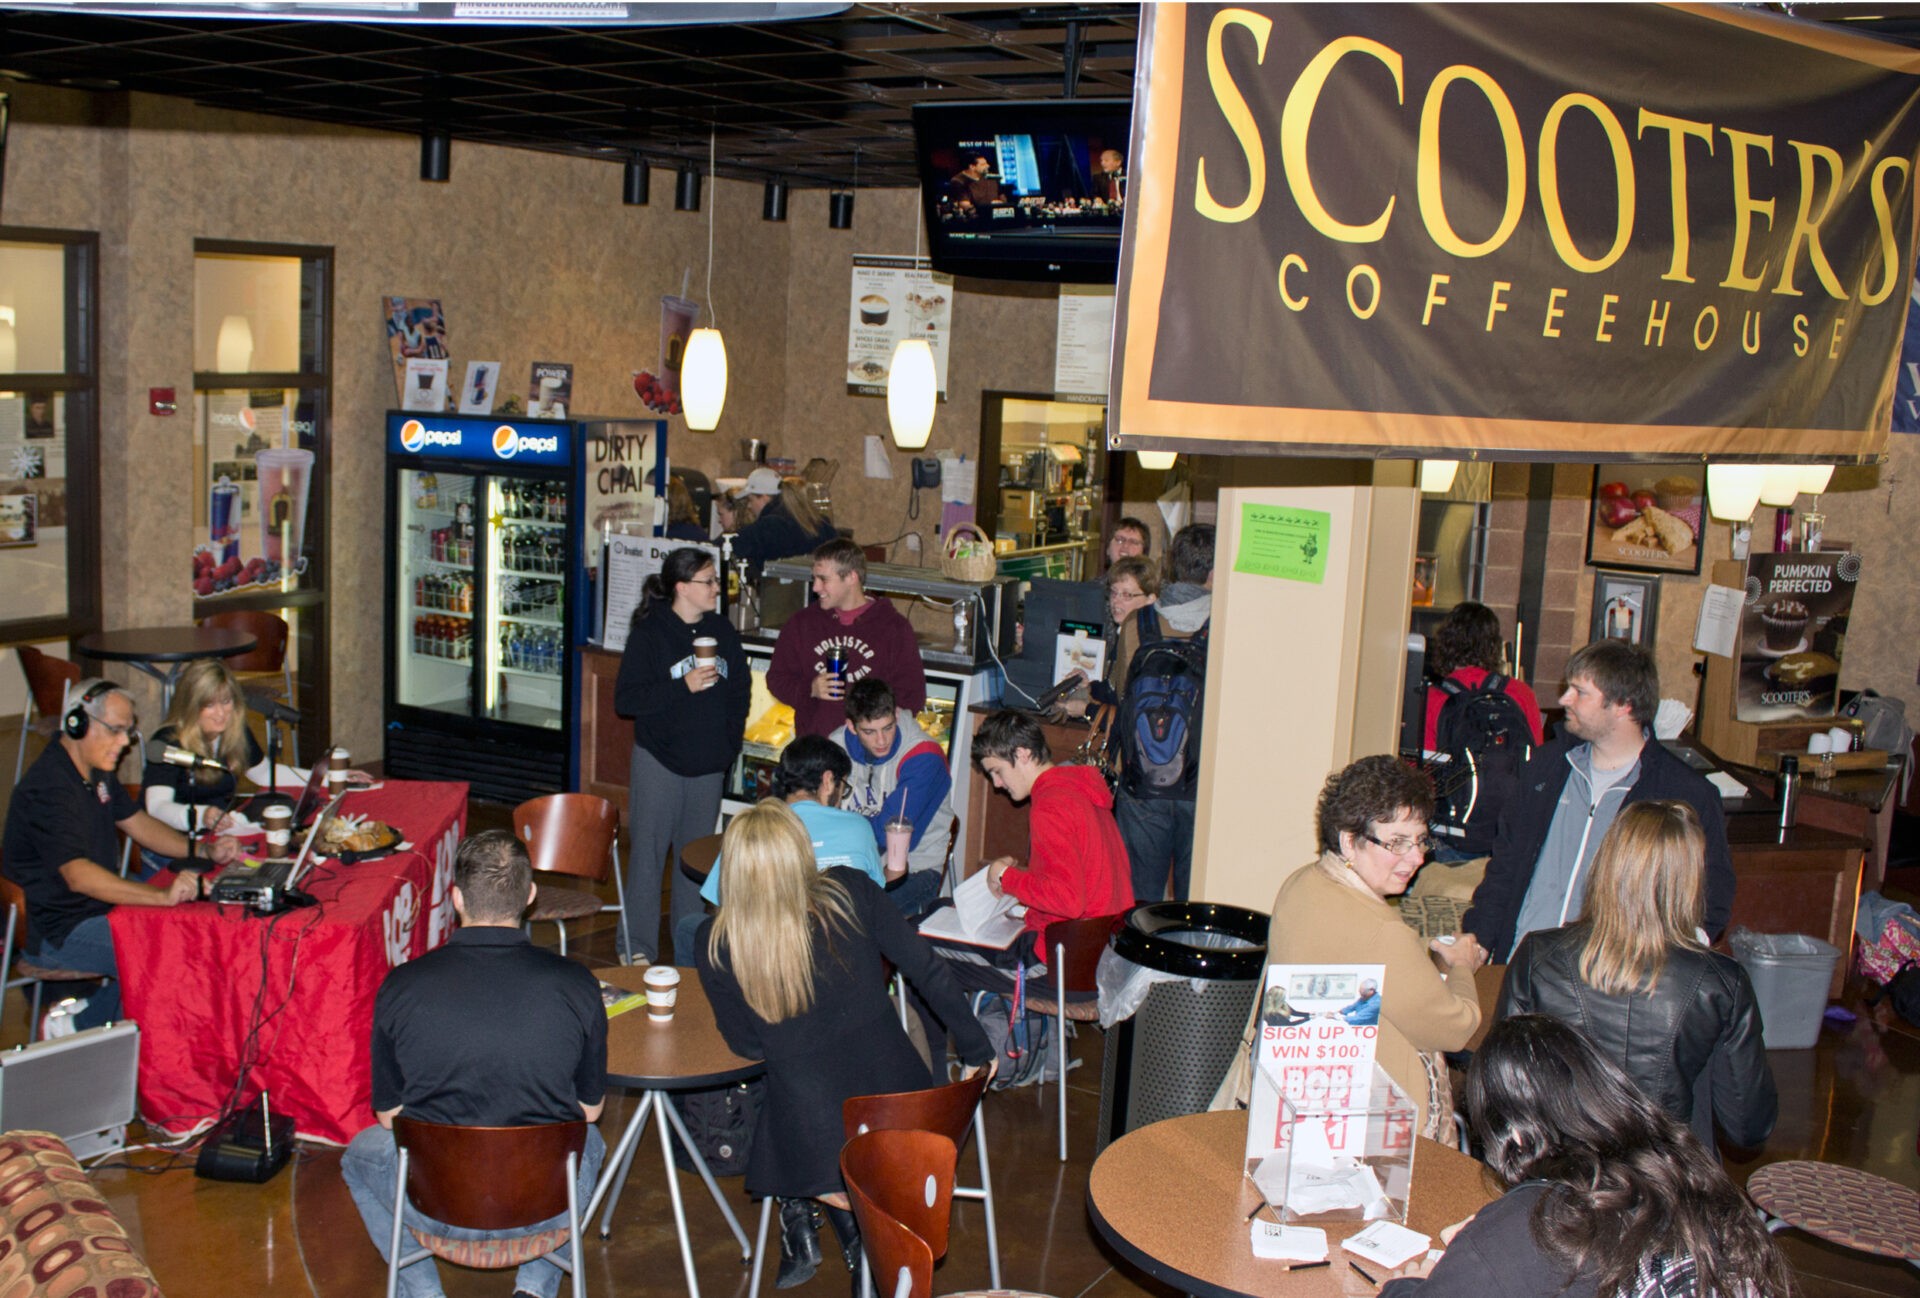 The live remote broadcast drew a crowd to Scooter's Coffeehouse early on Nov. 8.